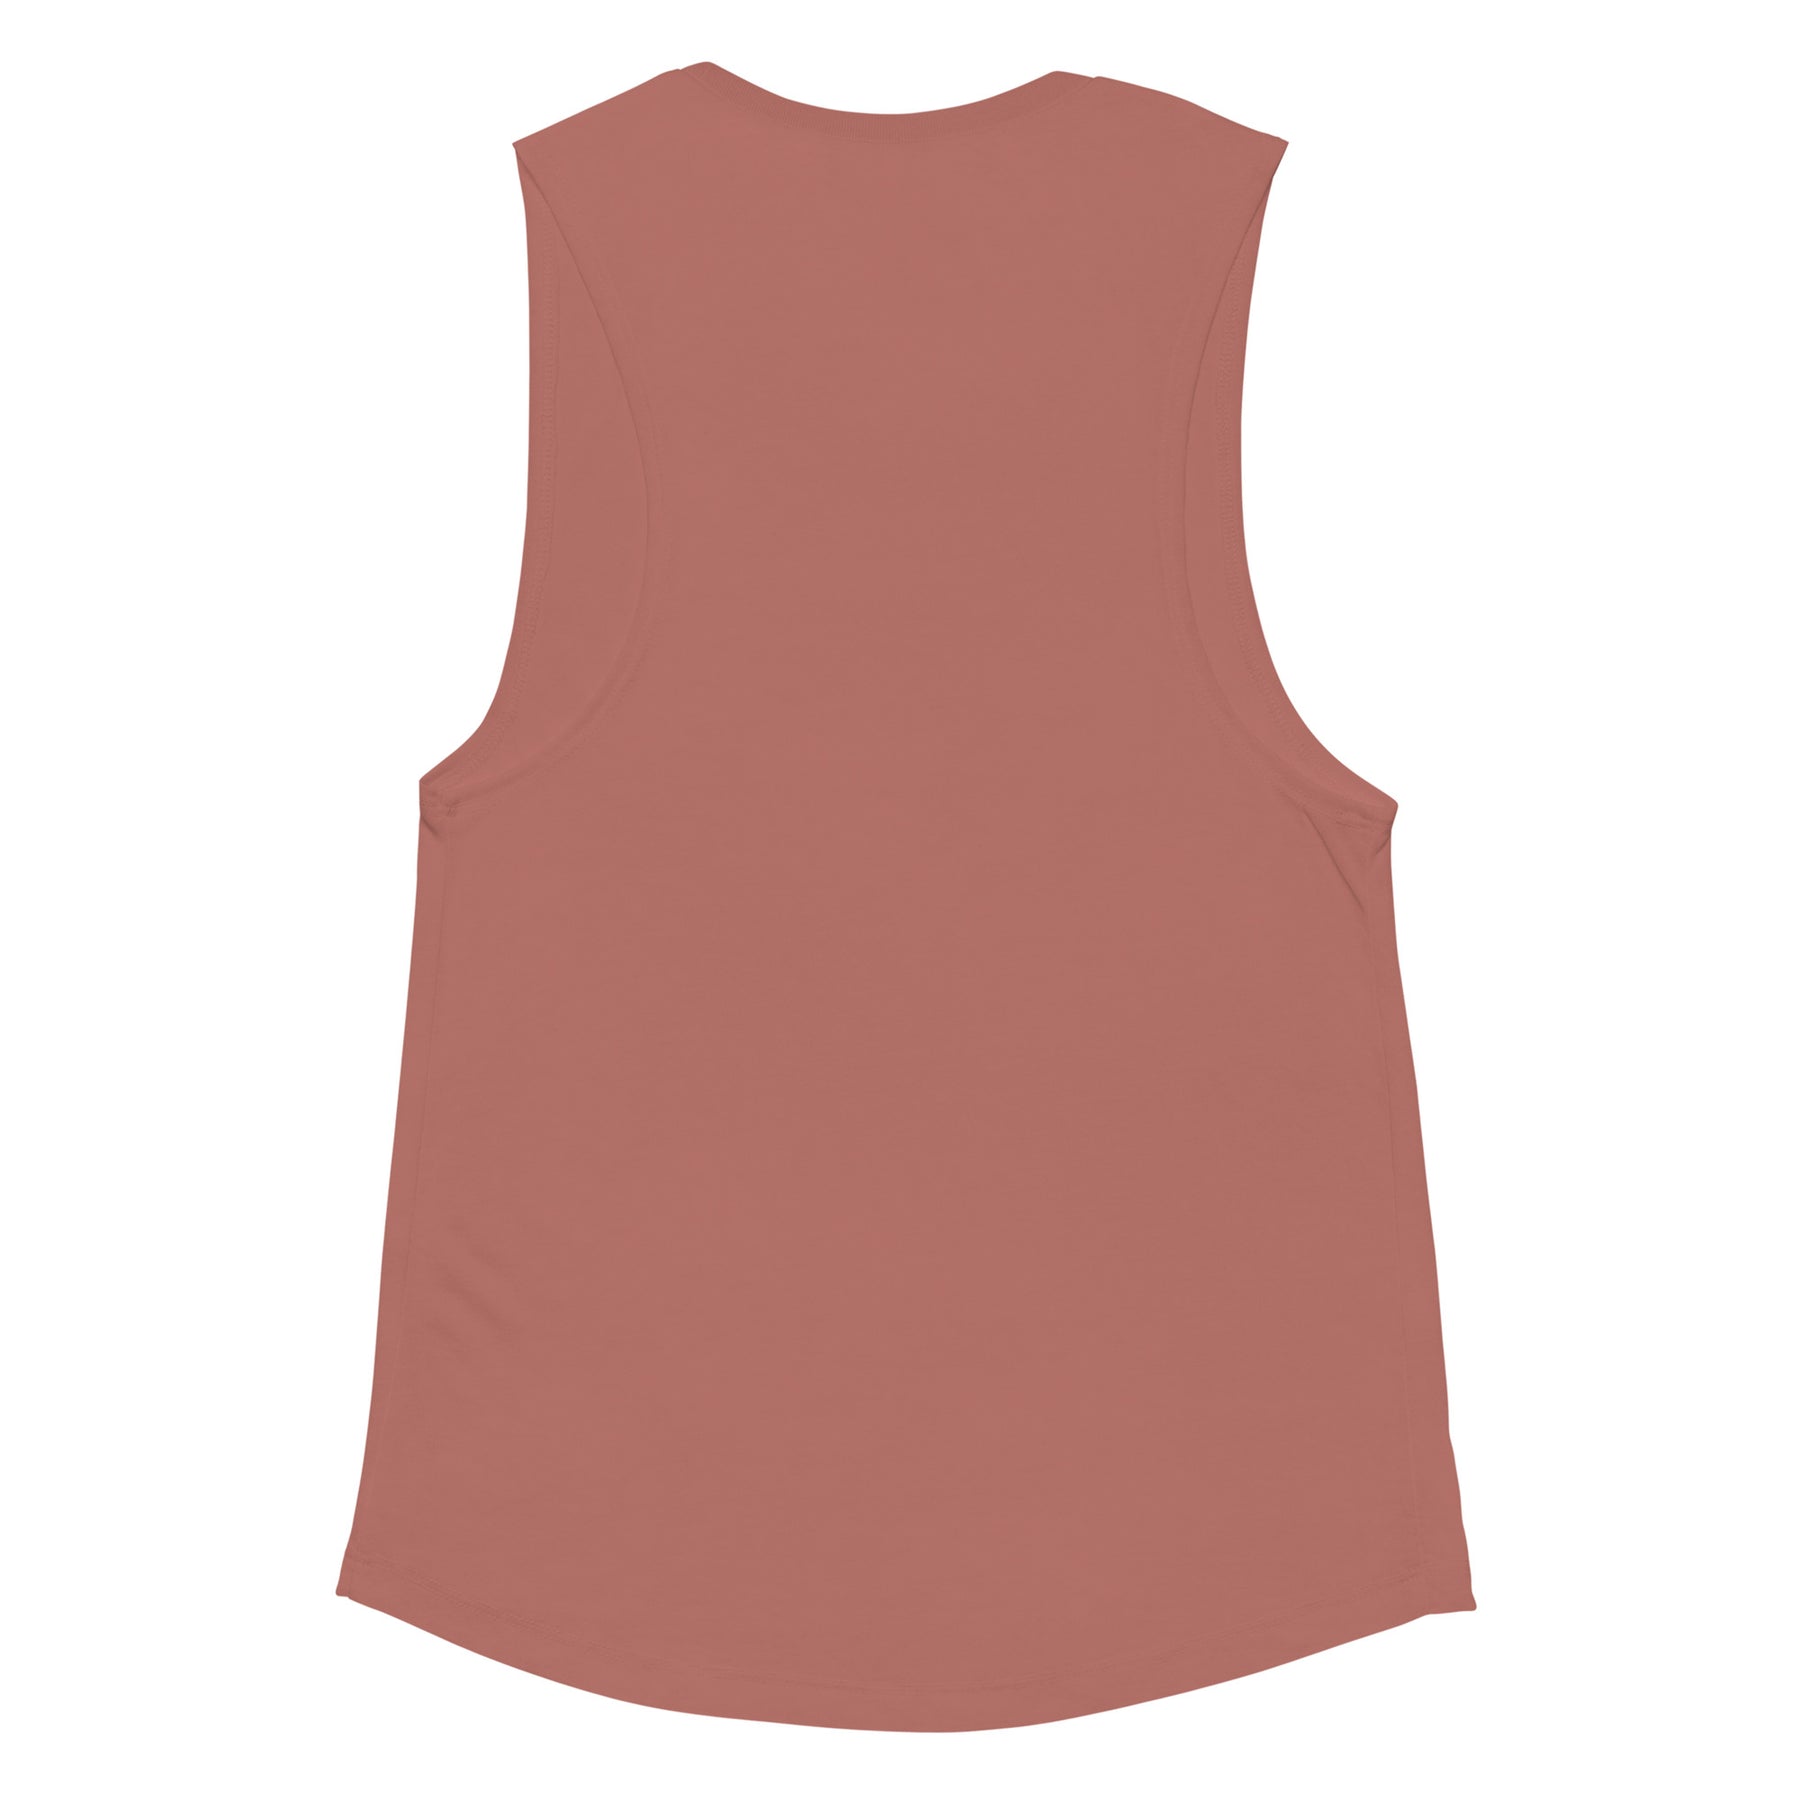 I Support Affirmative Action Women's Muscle Tank